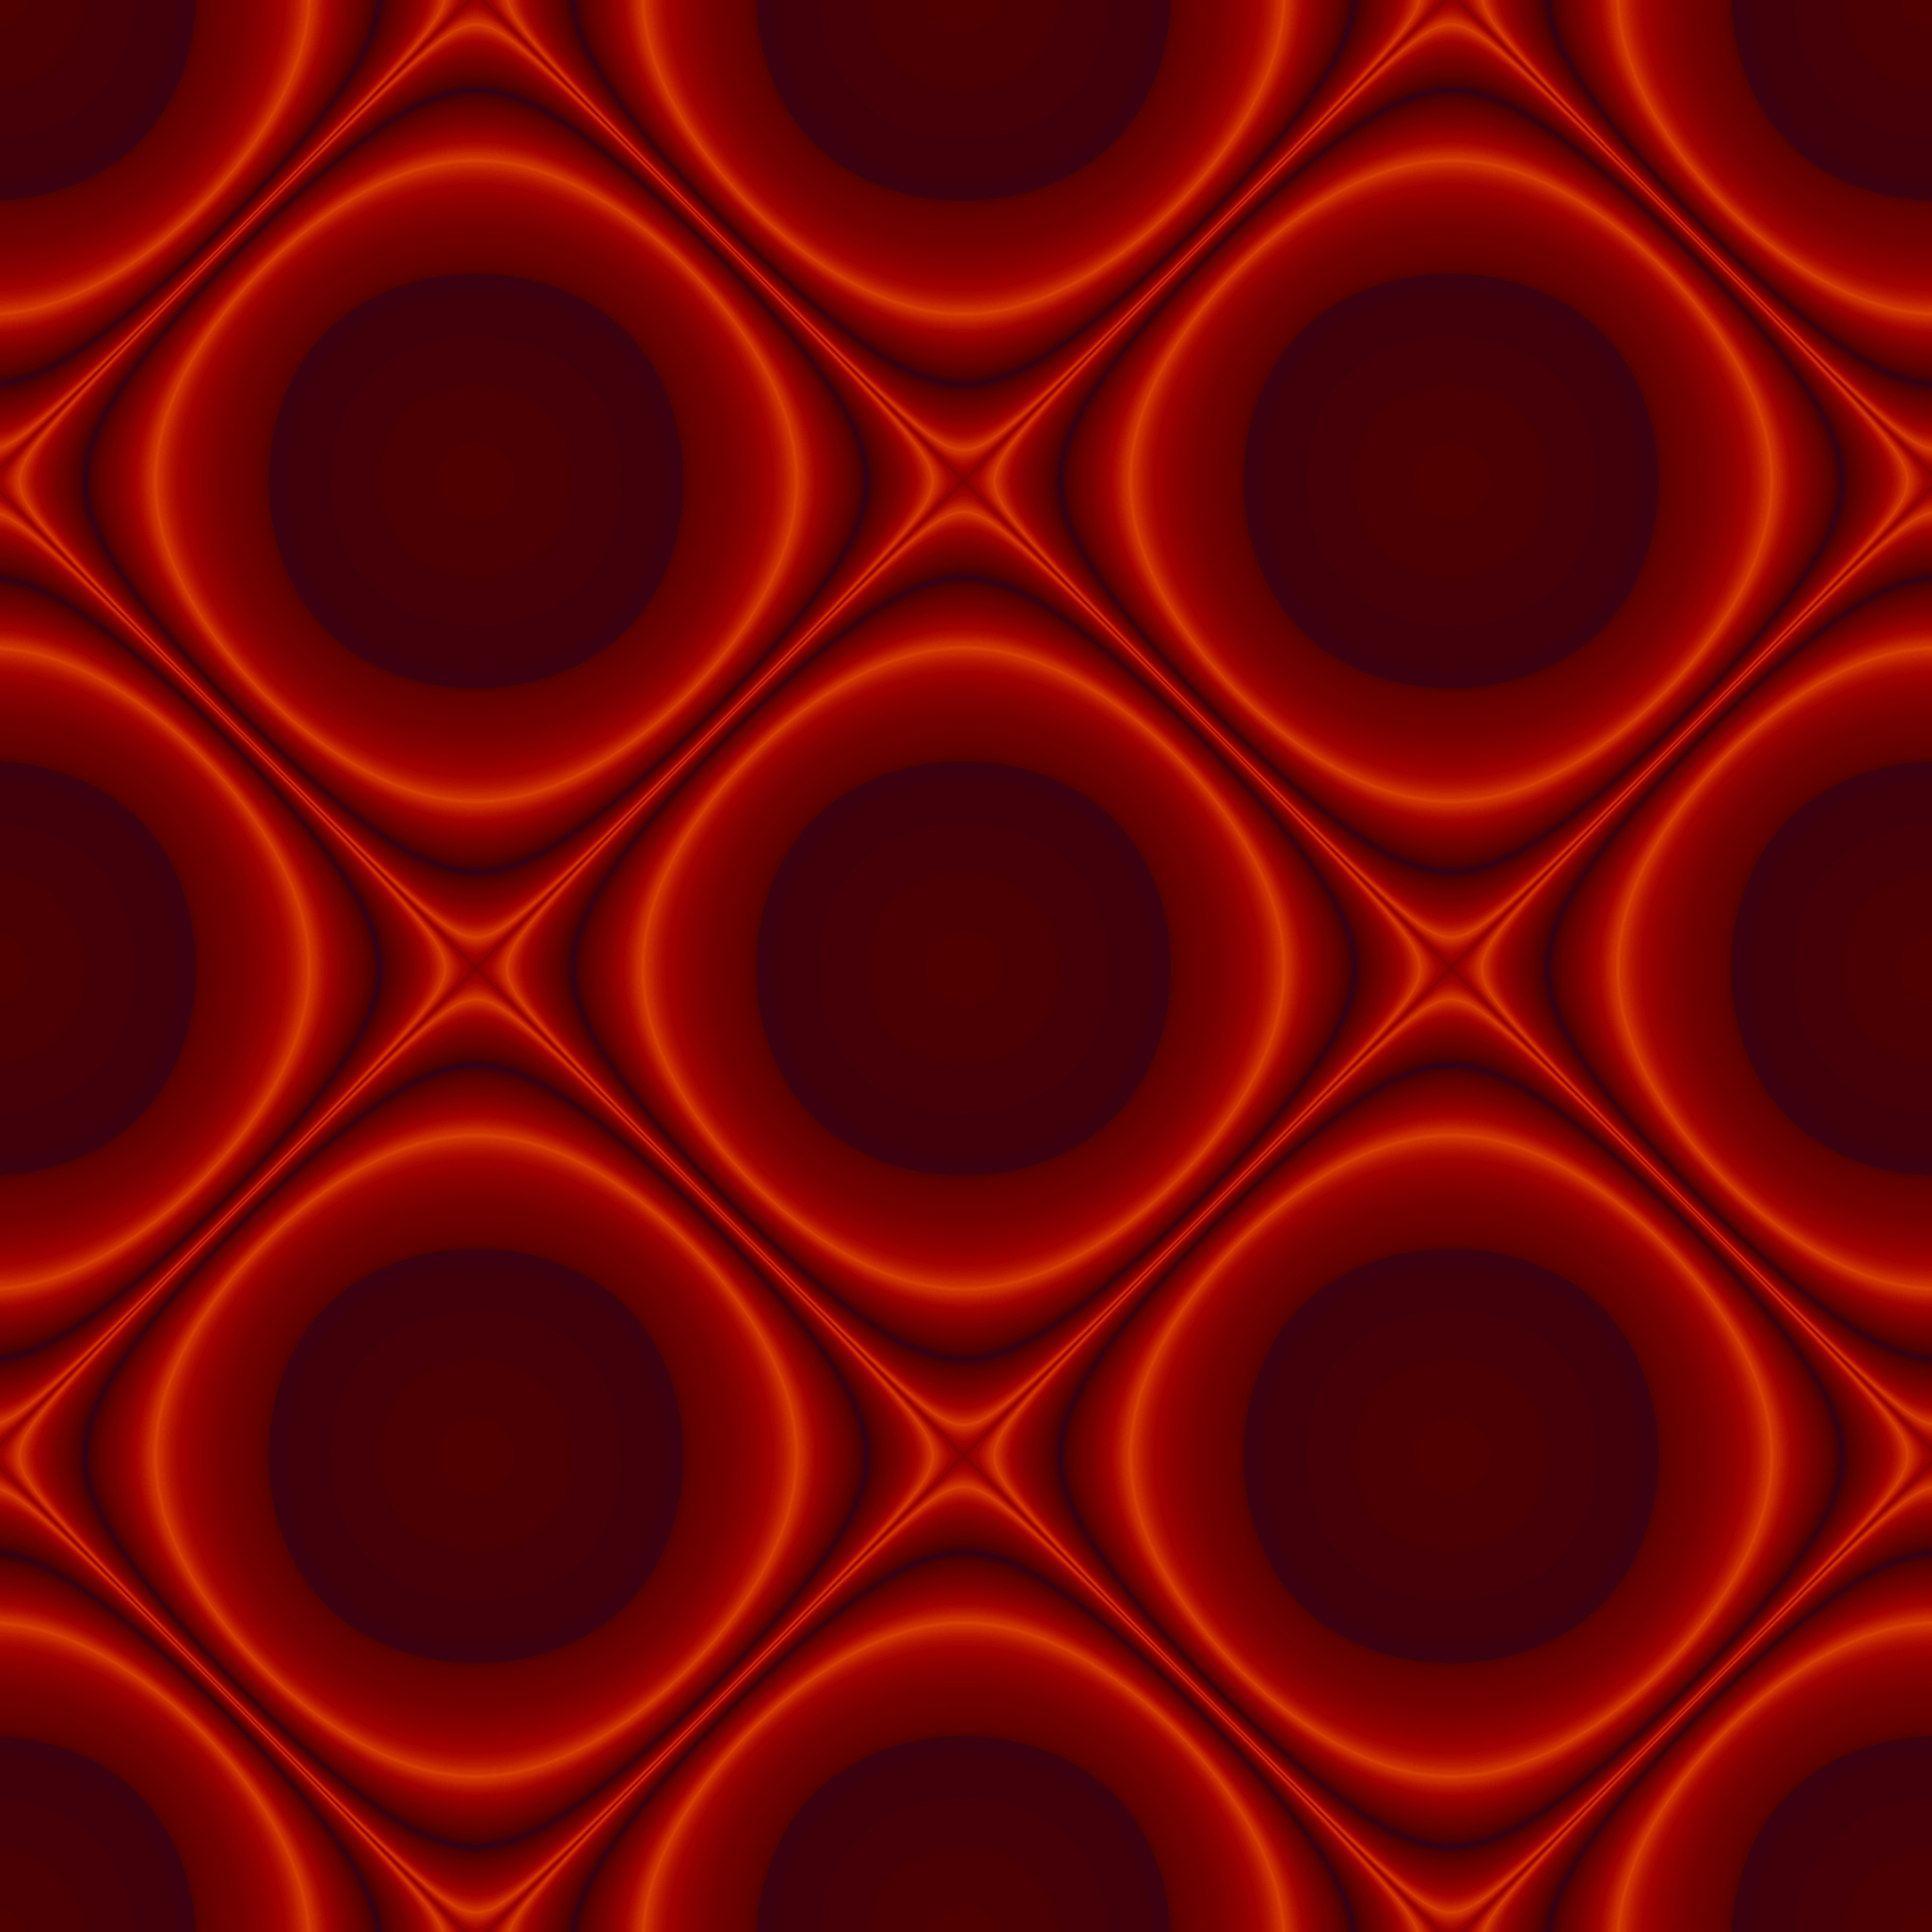 Abstract Pattern Design Red Ipad Wallpaper